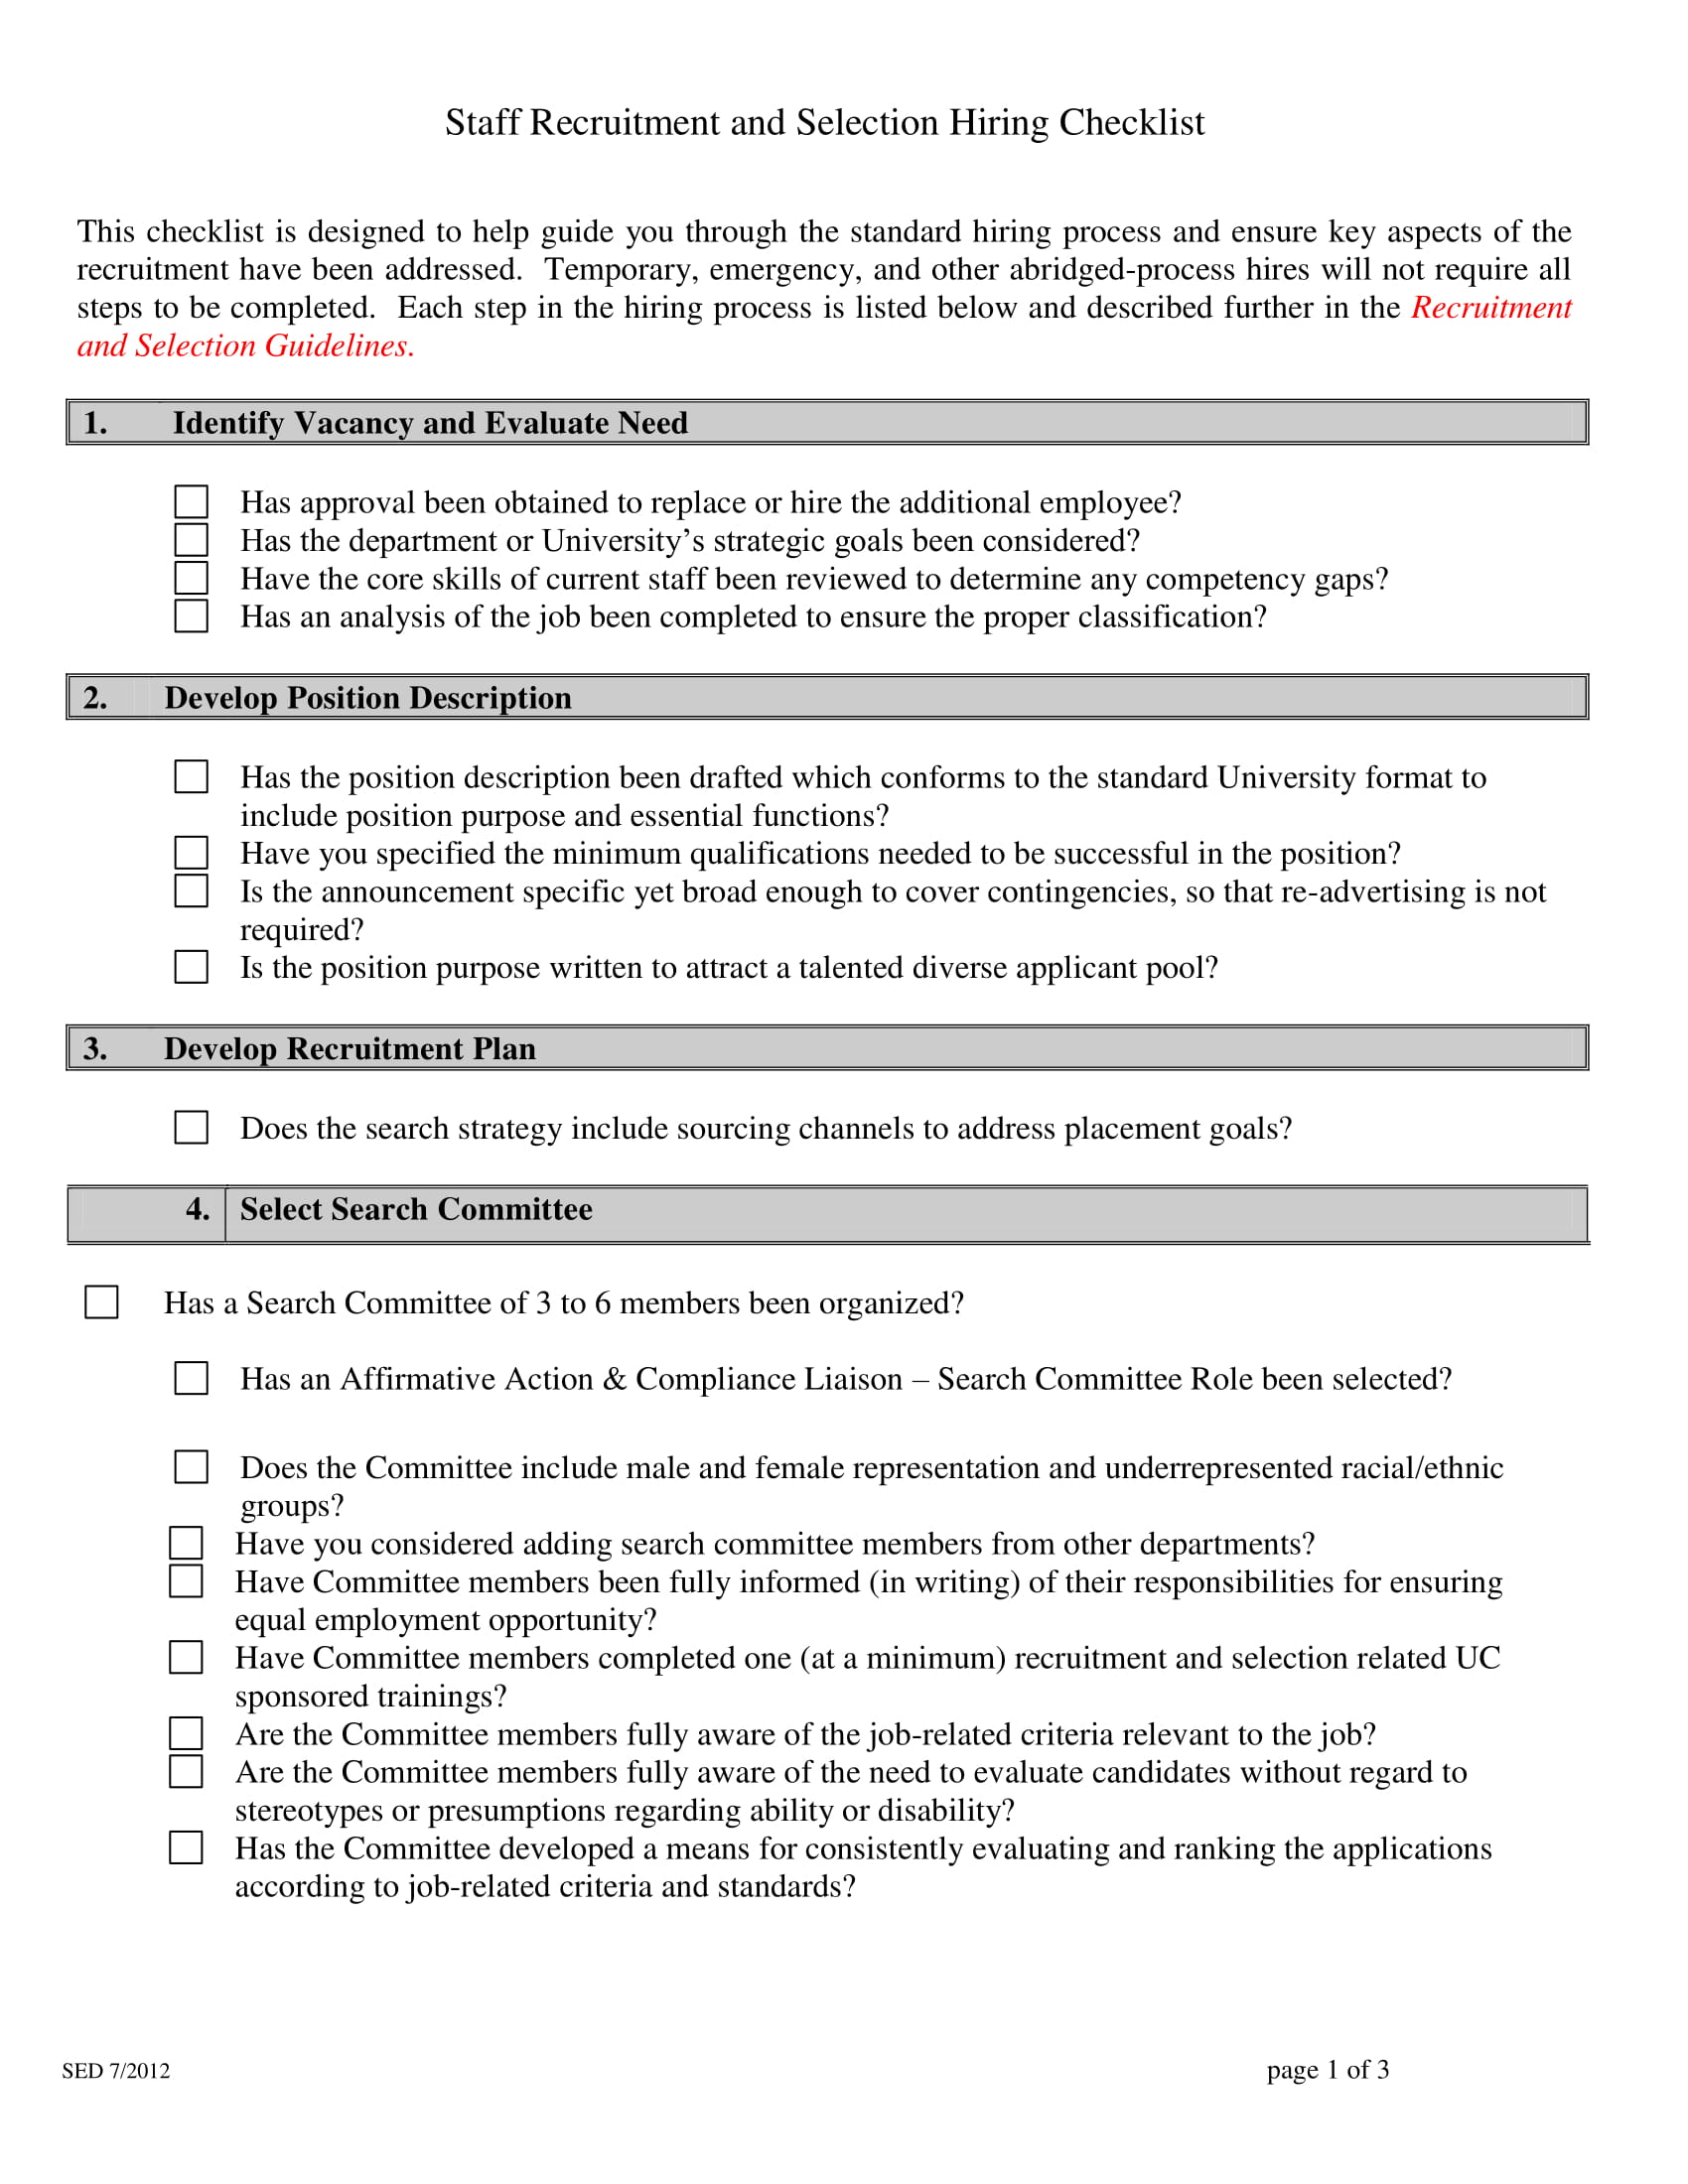 staff recruitment and selection process checklist